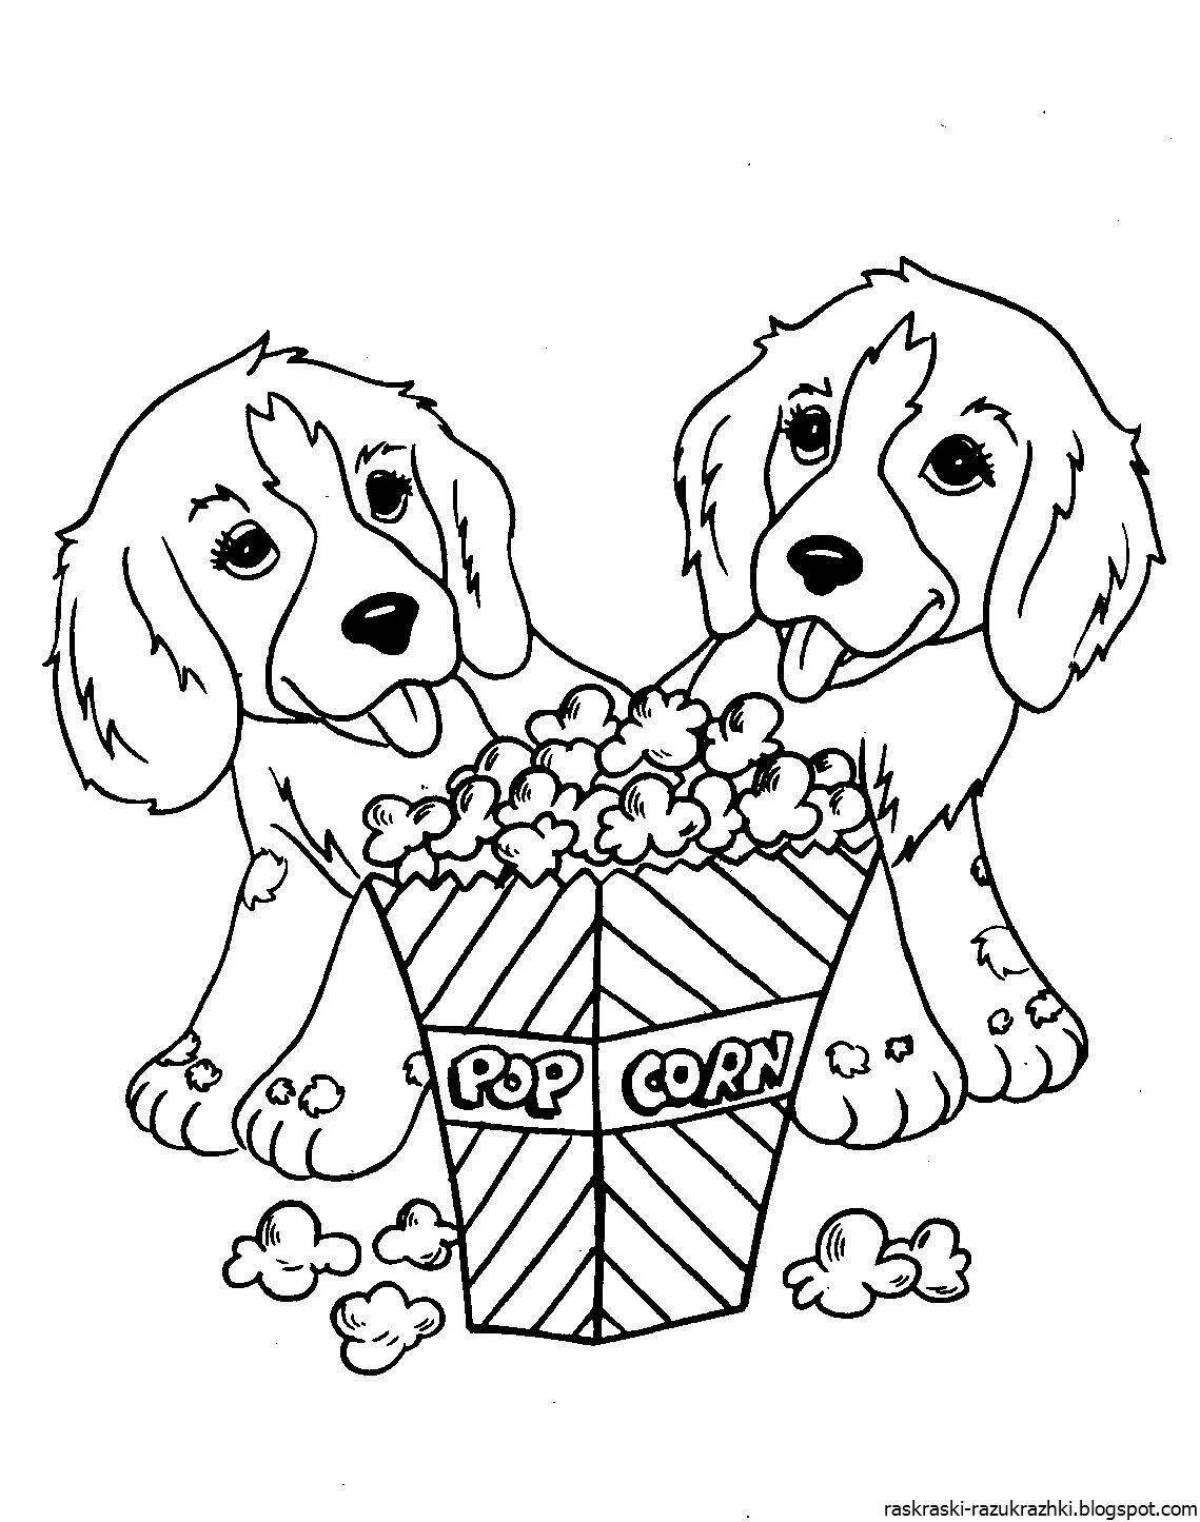 Cute puppy girl coloring book